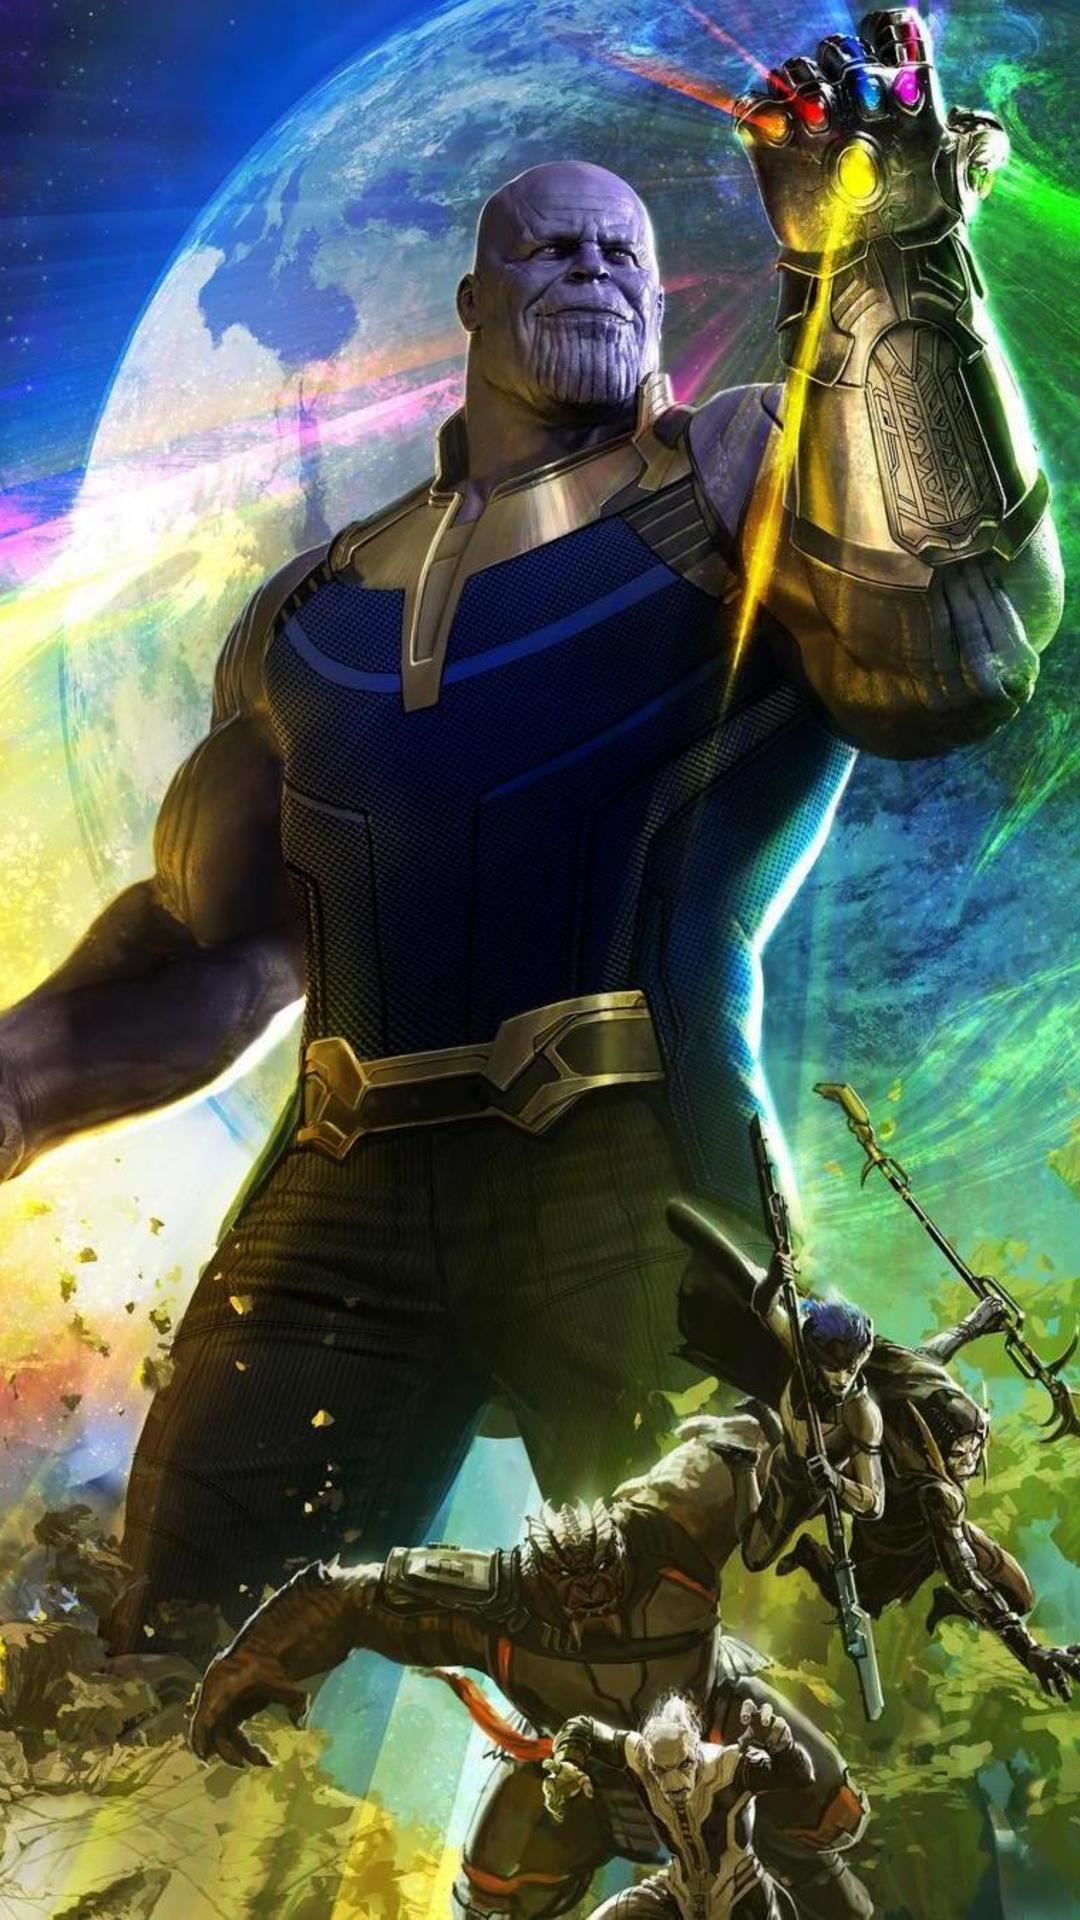 Thanos htc one wallpaper, free and easy to download